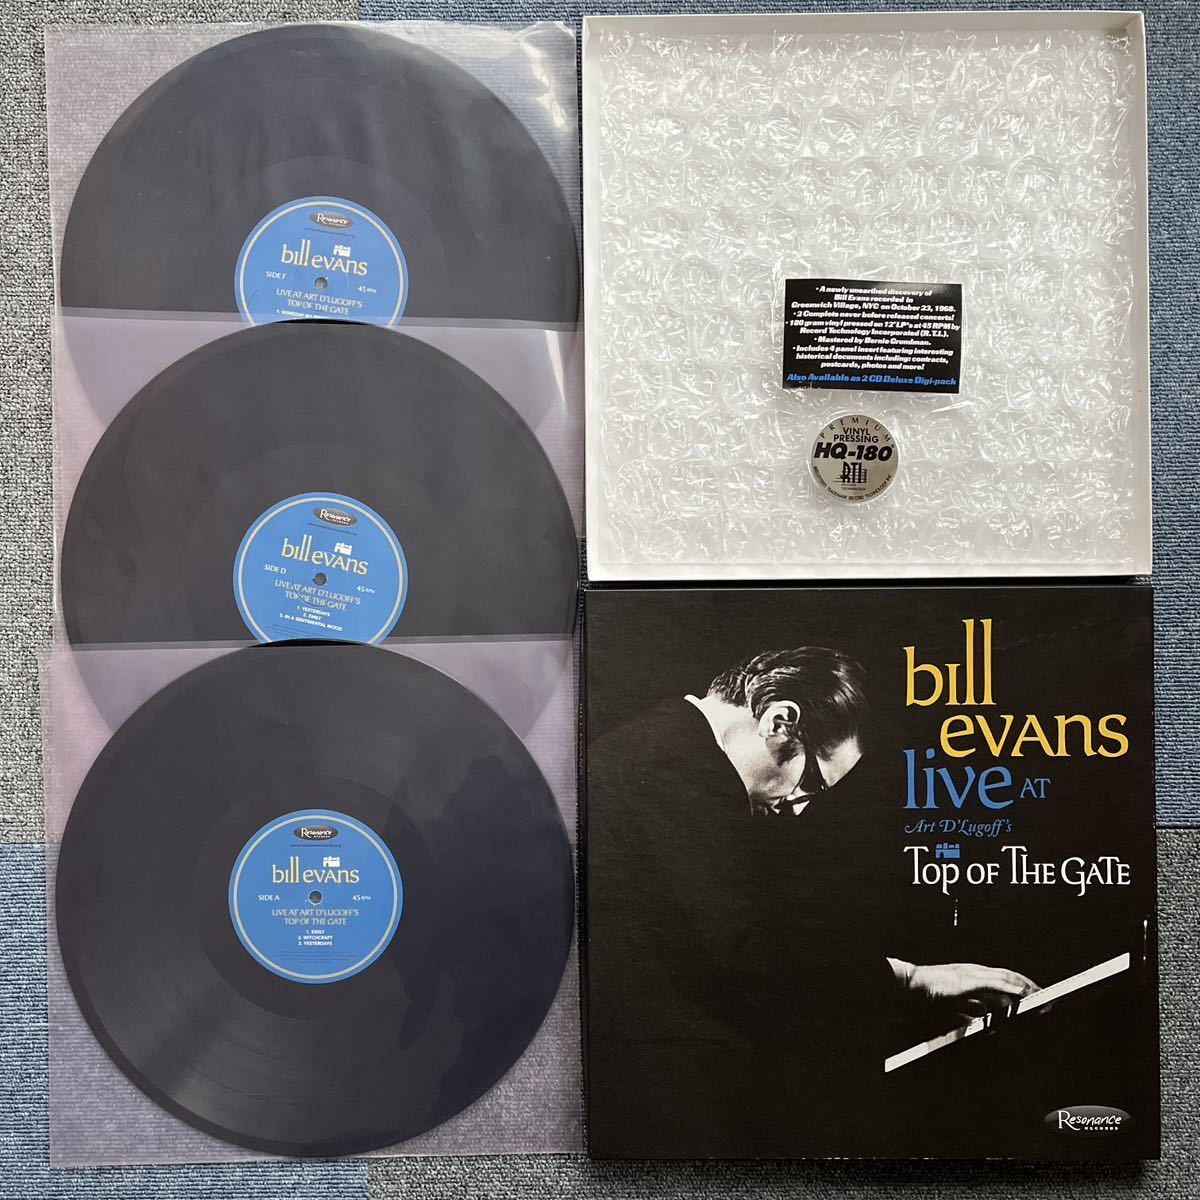 Bill Evans Live At Art D'Lugoff's Top Of The Gate 180g LP×3枚box_画像1